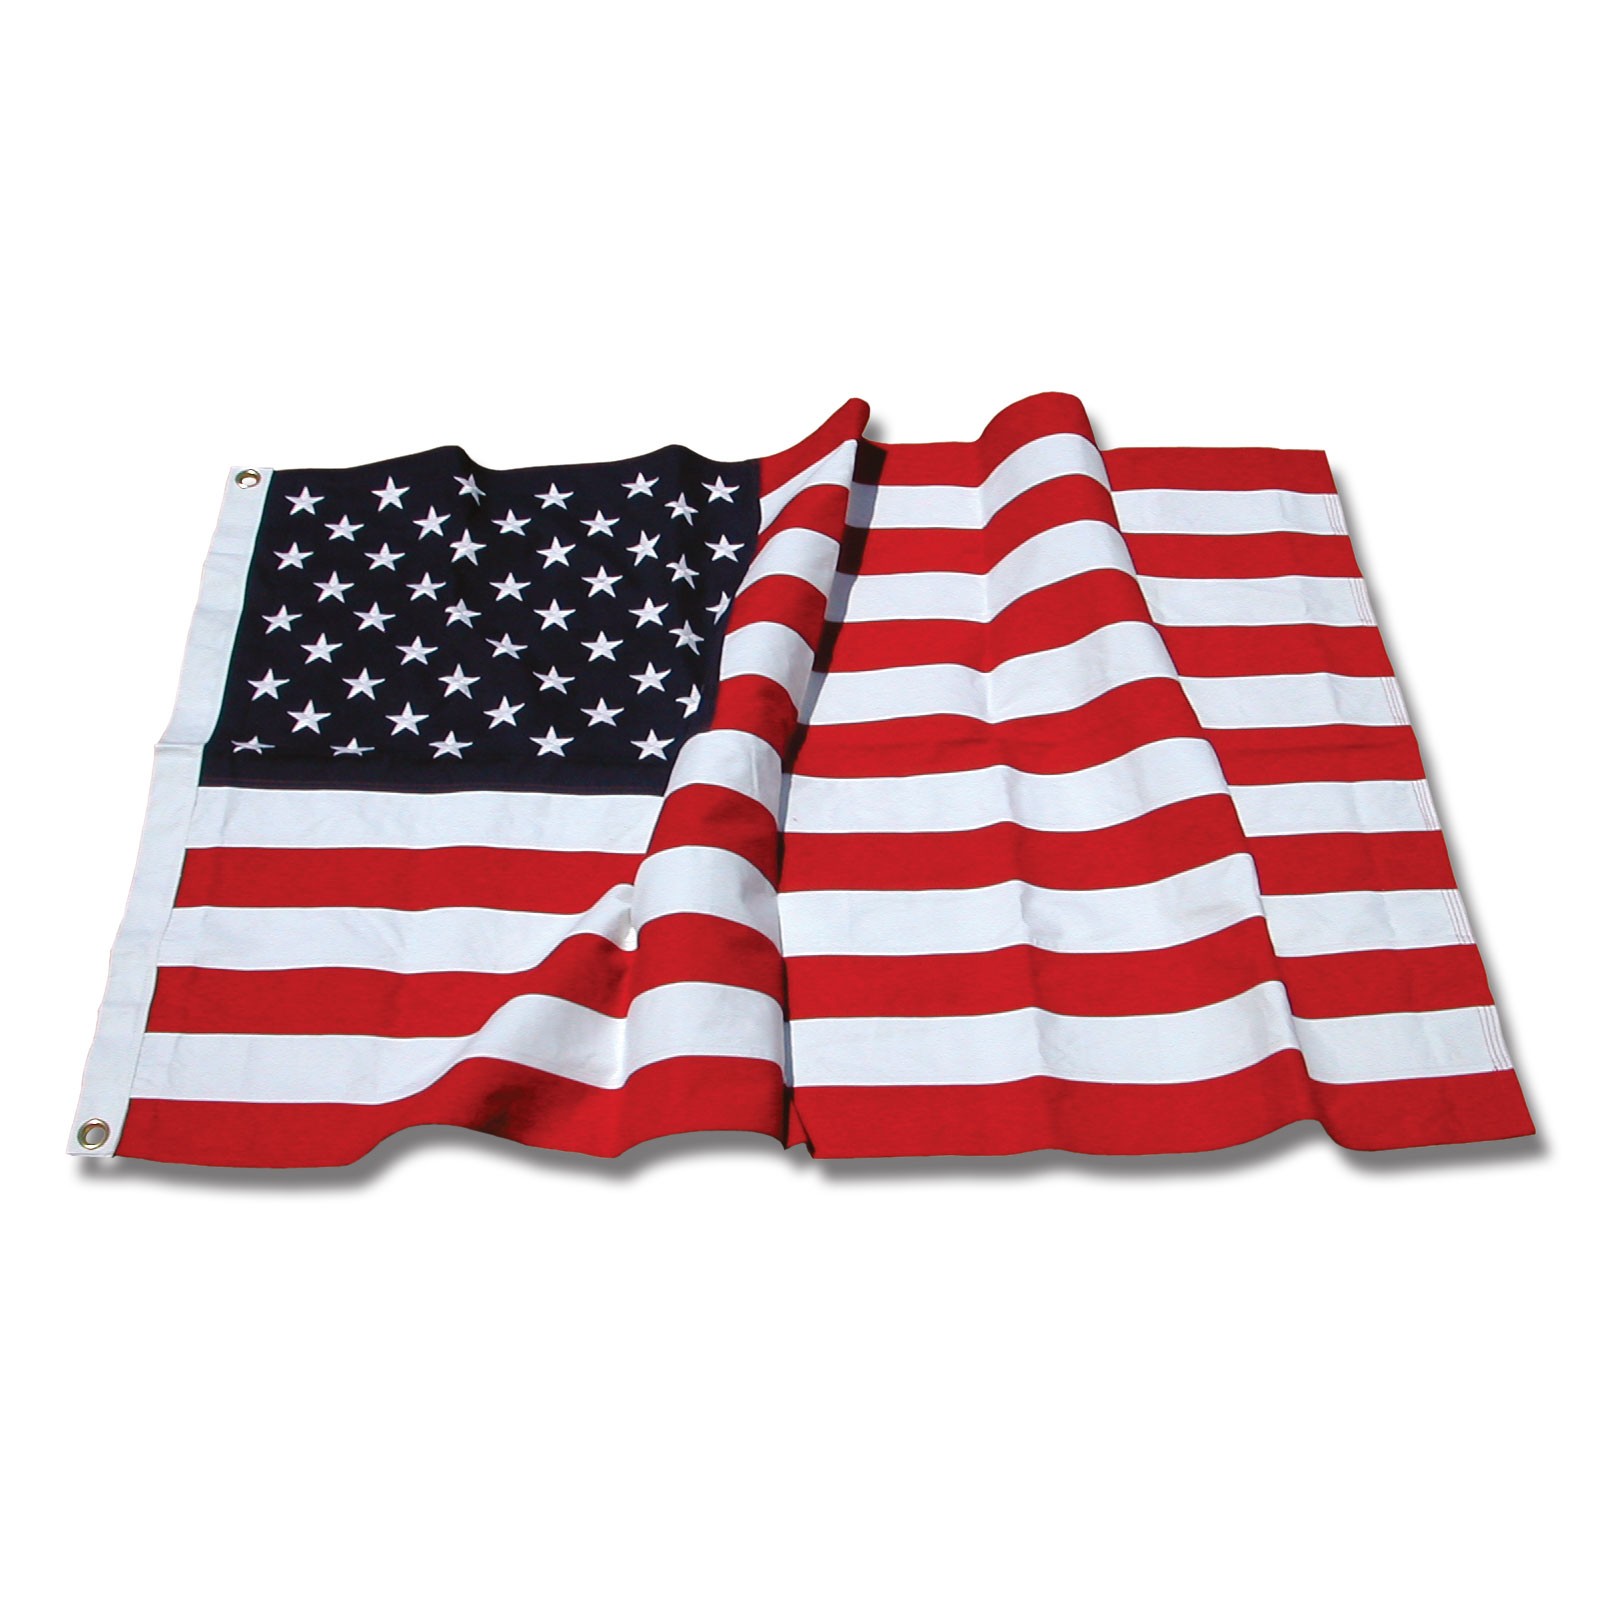 American Flag 3ft x 5ft Sewn Cotton - Online Stores Brand